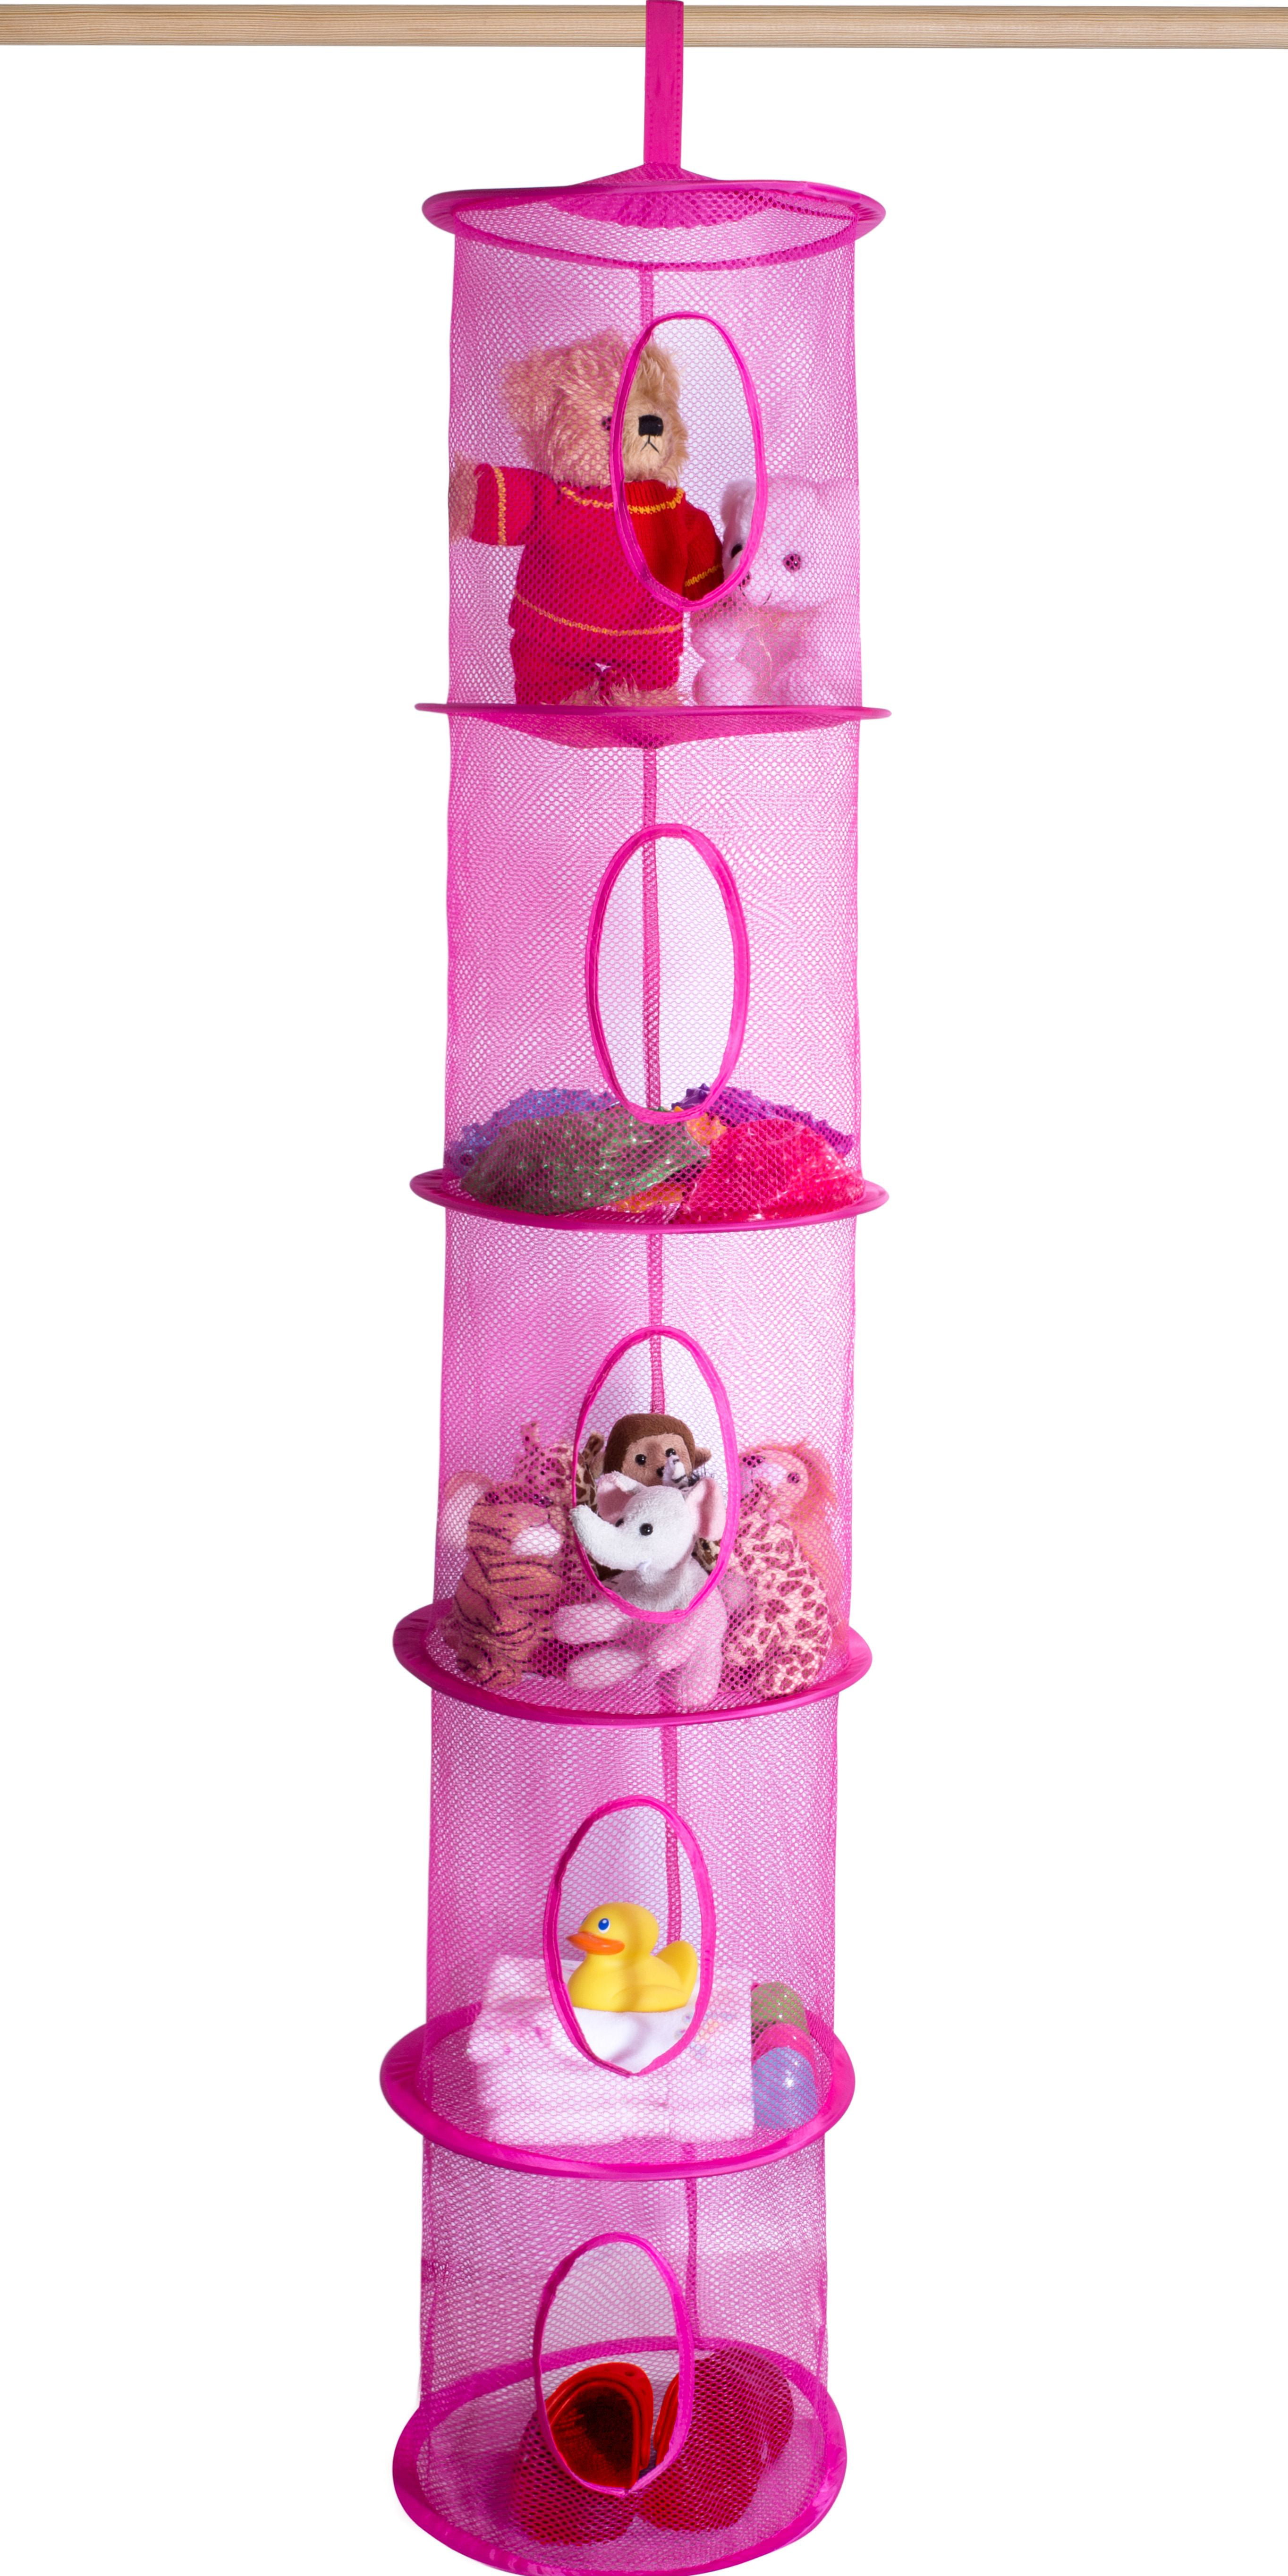 Details about   Kids Net Mesh Toy Cubby,4 Compartments Organizer for Storing Toys/Clothes Gray  